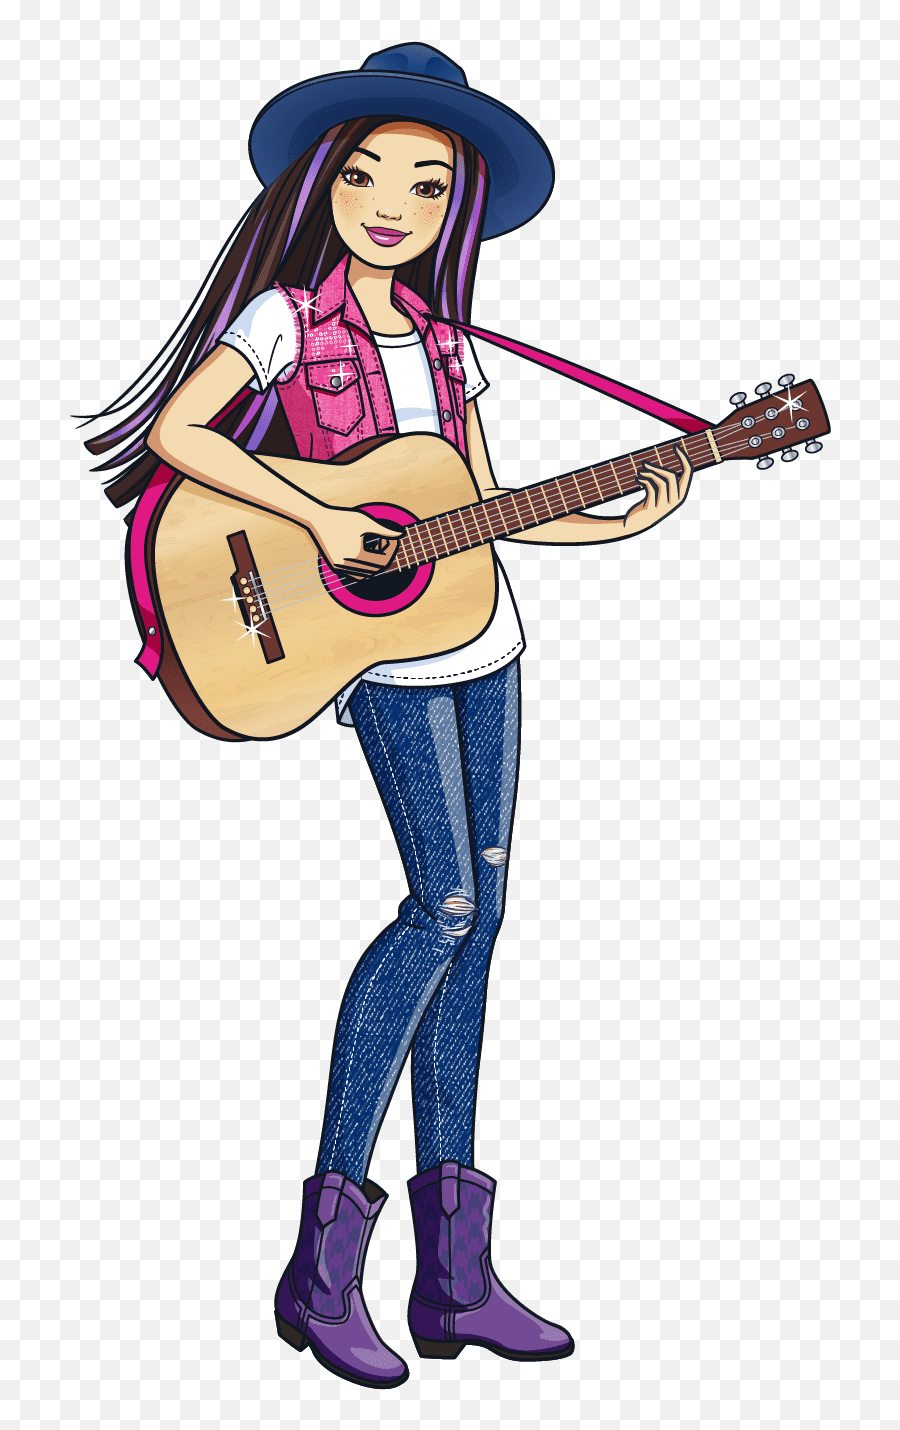 Barbie Silhouette Png - Barbie With Guitar,Guitar Silhouette Png